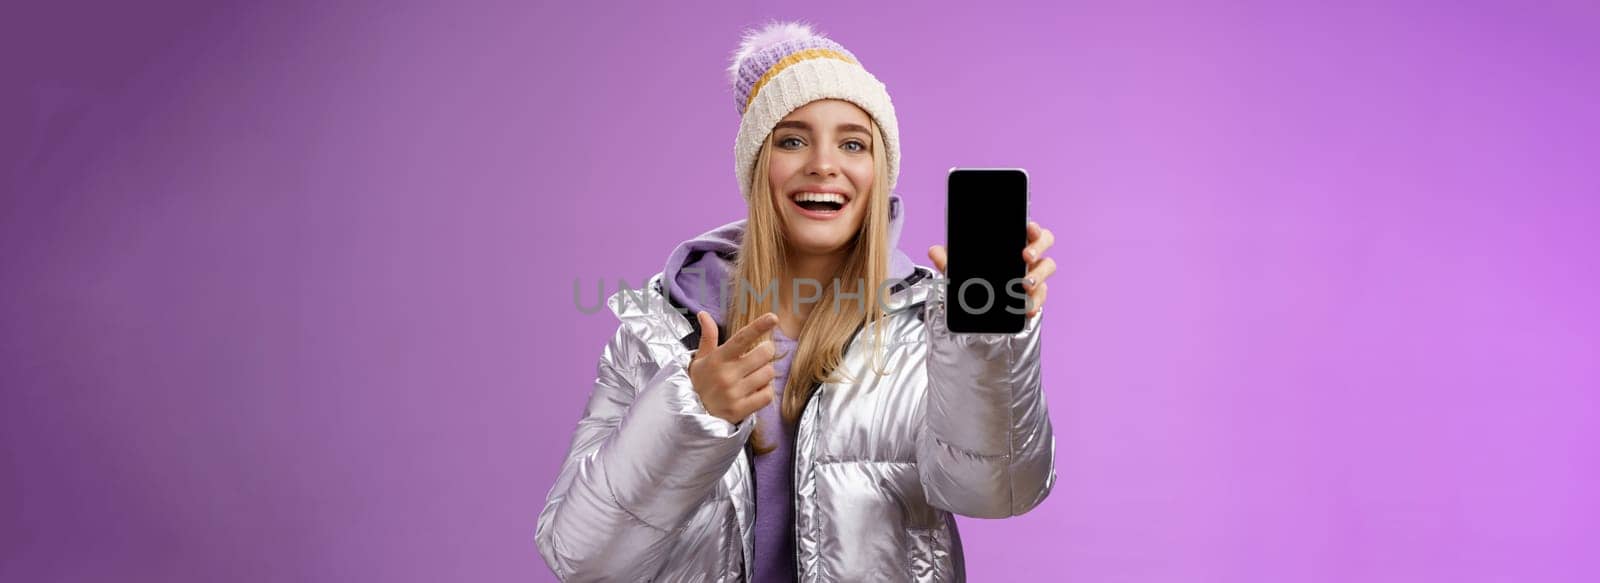 Satisfied amused good-looking blond girl suggest take look smartphone display smiling happily pointing mobile phone delighted talking about awesome new app features, standing purple background.